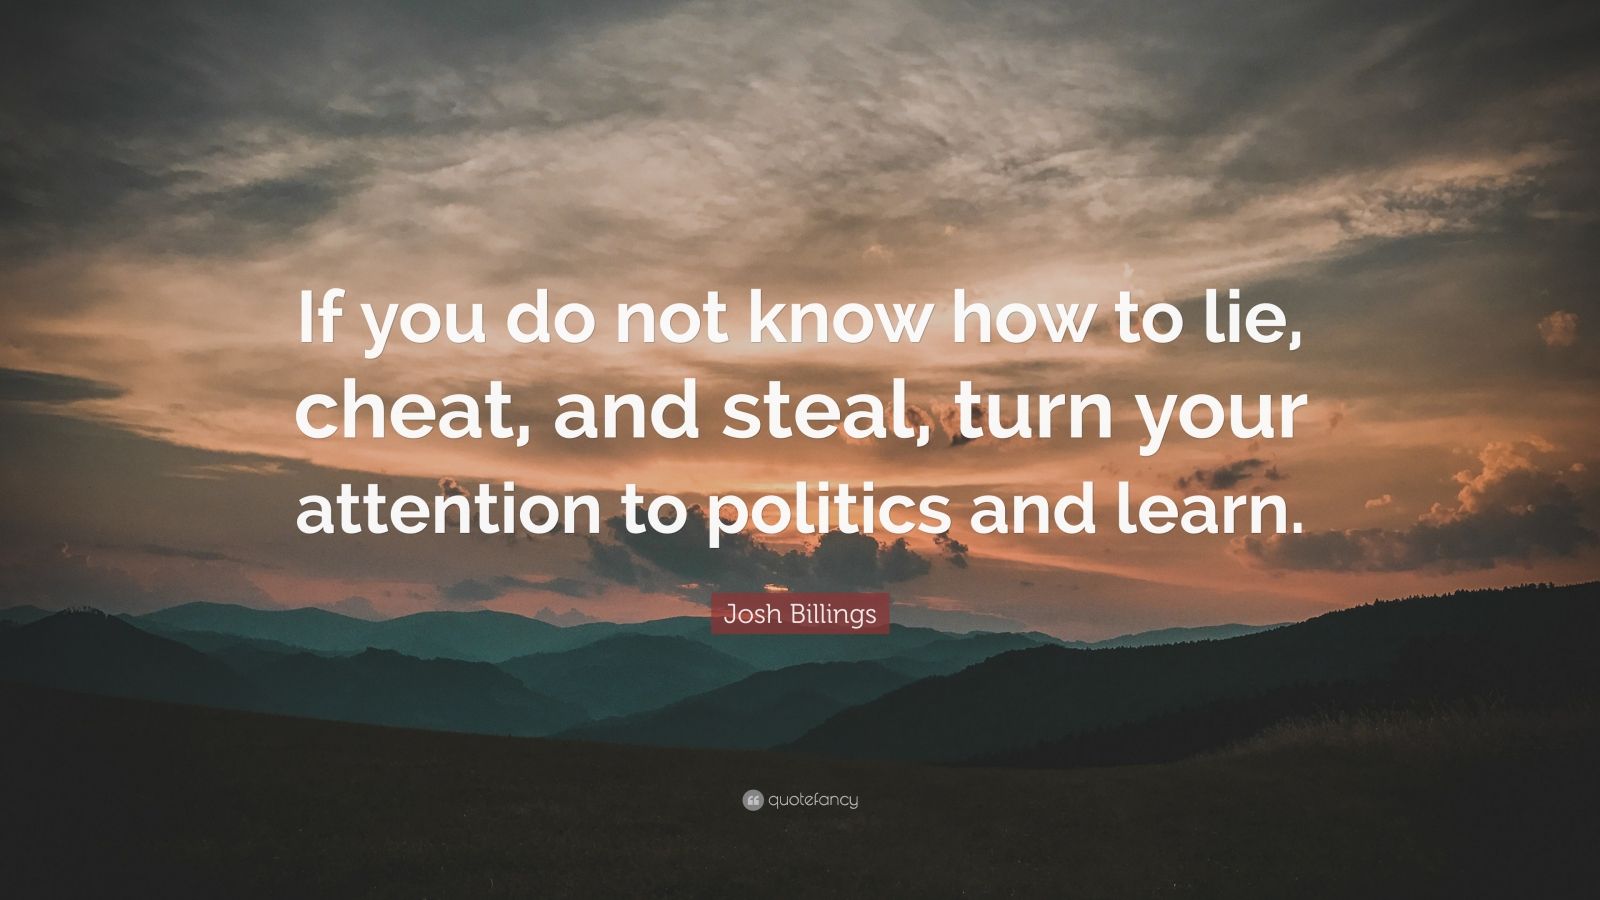 Josh Billings Quote: "If you do not know how to lie, cheat, and steal, turn your attention to ...